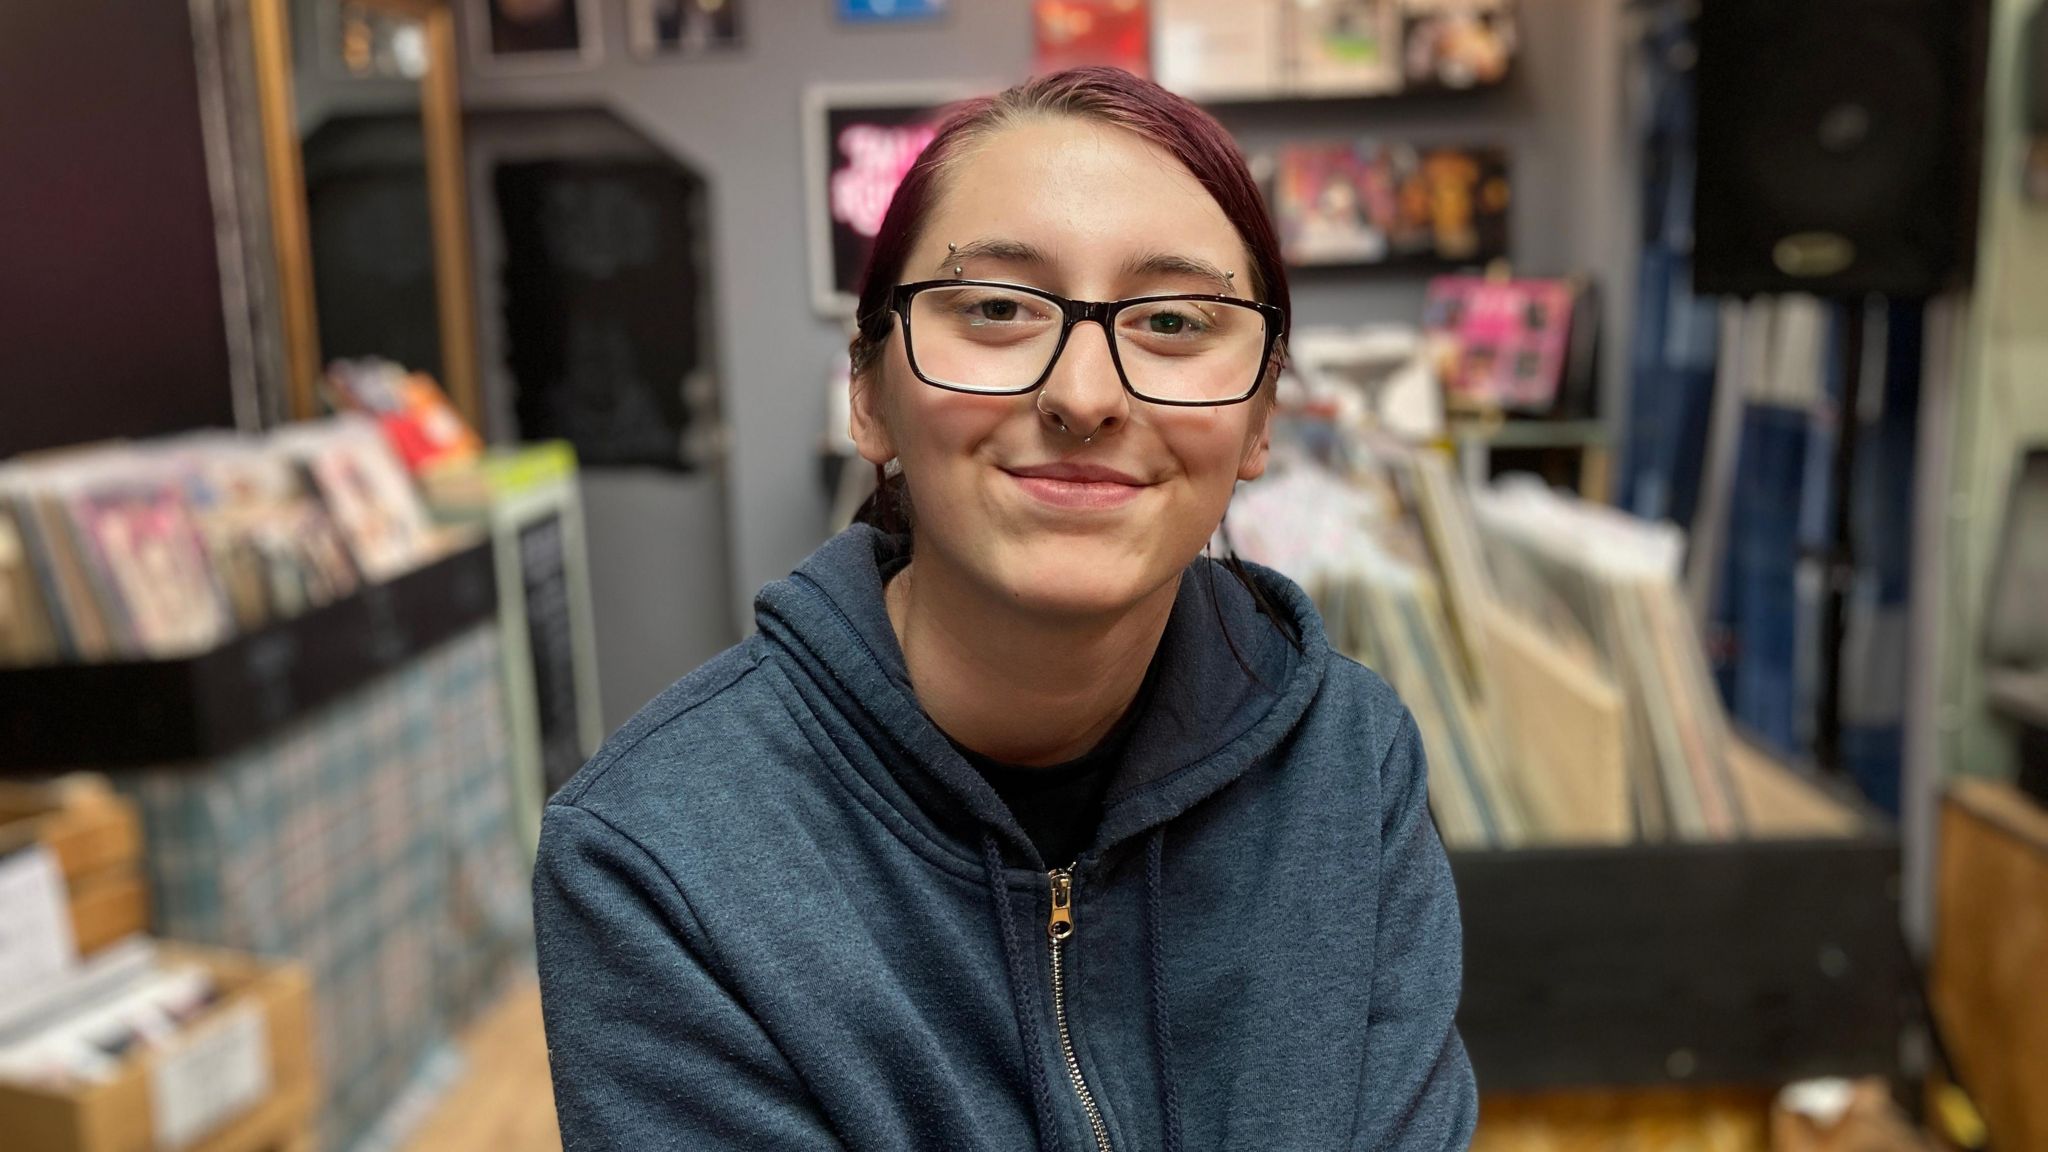 Paris Mehmet is looking straight towards the camera. There are records for sale behind her. She is wearing glasses and smiling